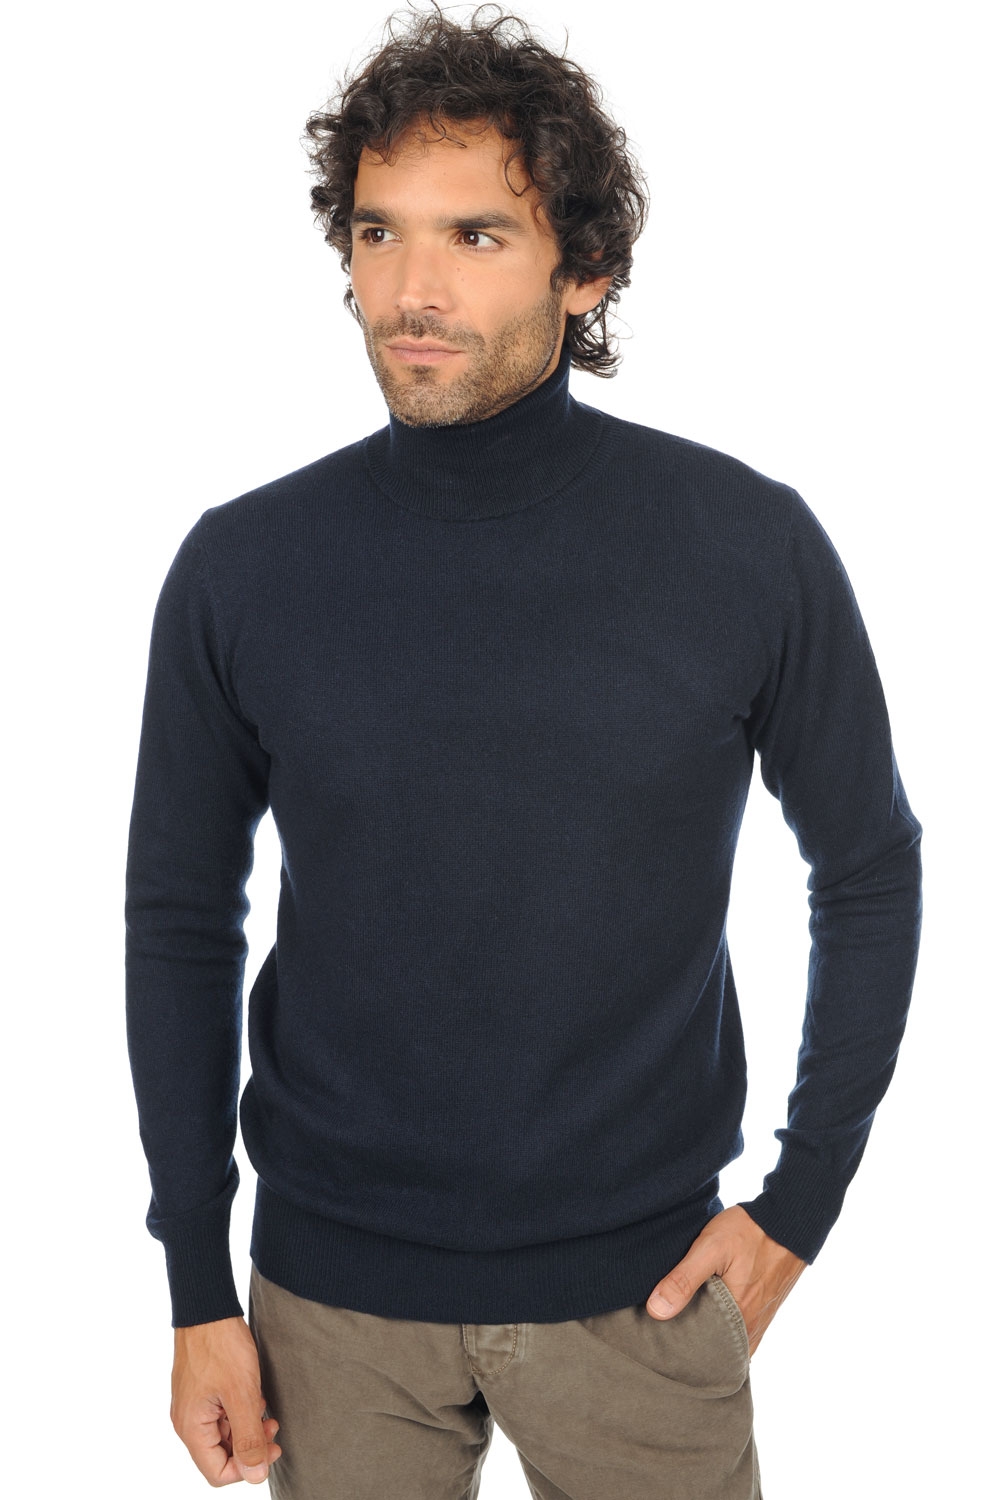 Cashmere men basic sweaters at low prices tarry first dress blue m